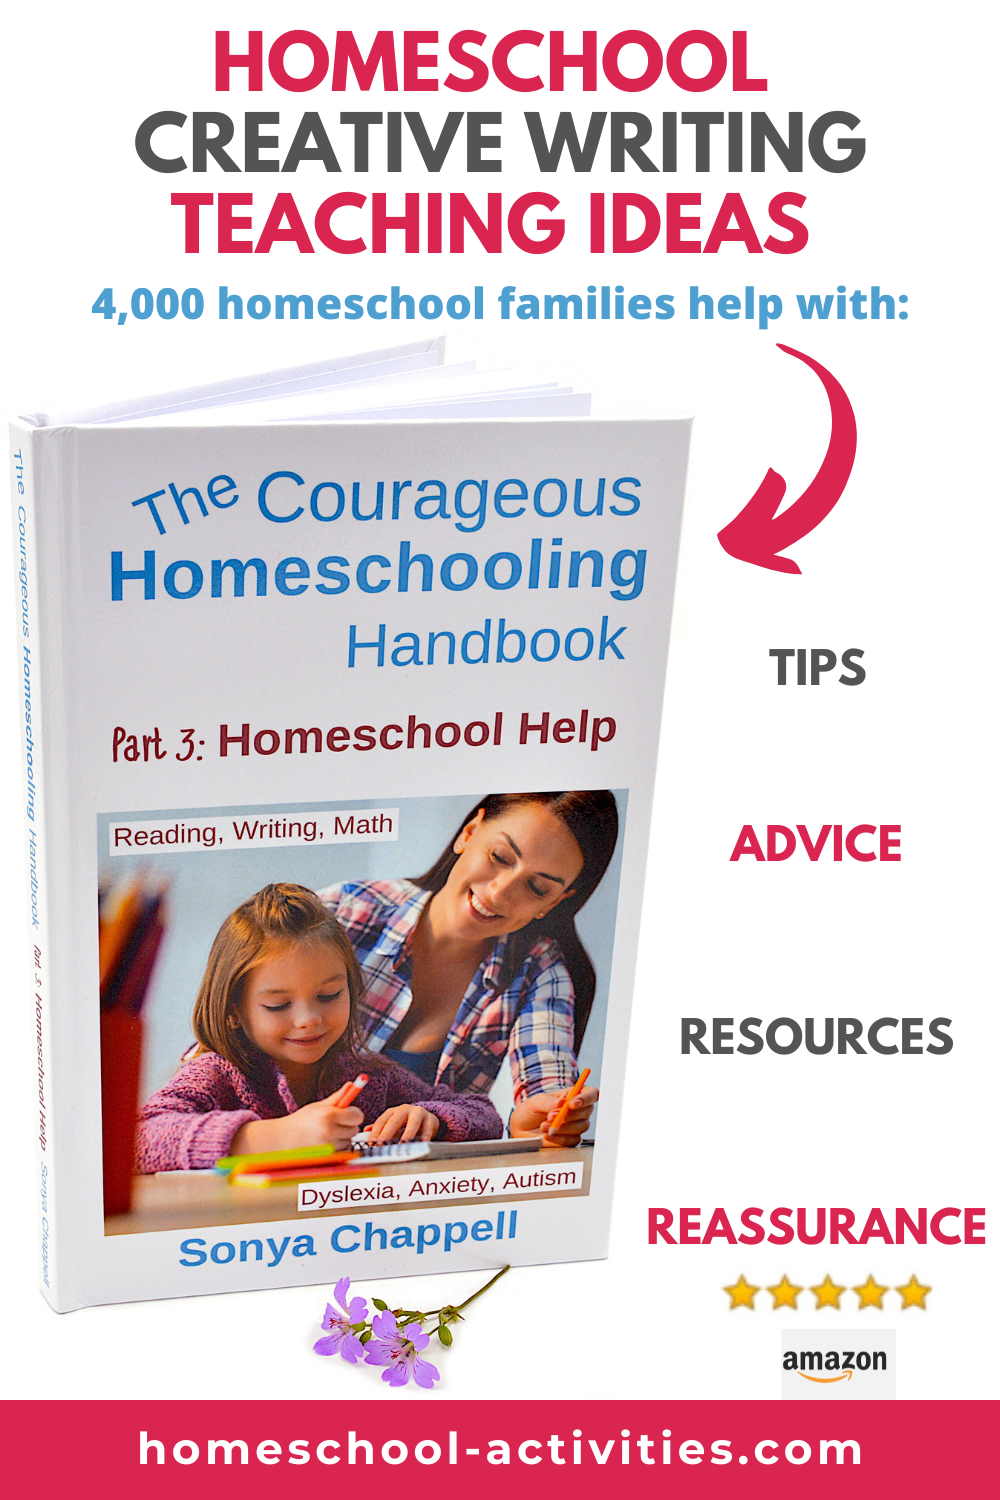 Teaching homeschool writing with ideas, tips and reassurance from 4,000 homeschooling families